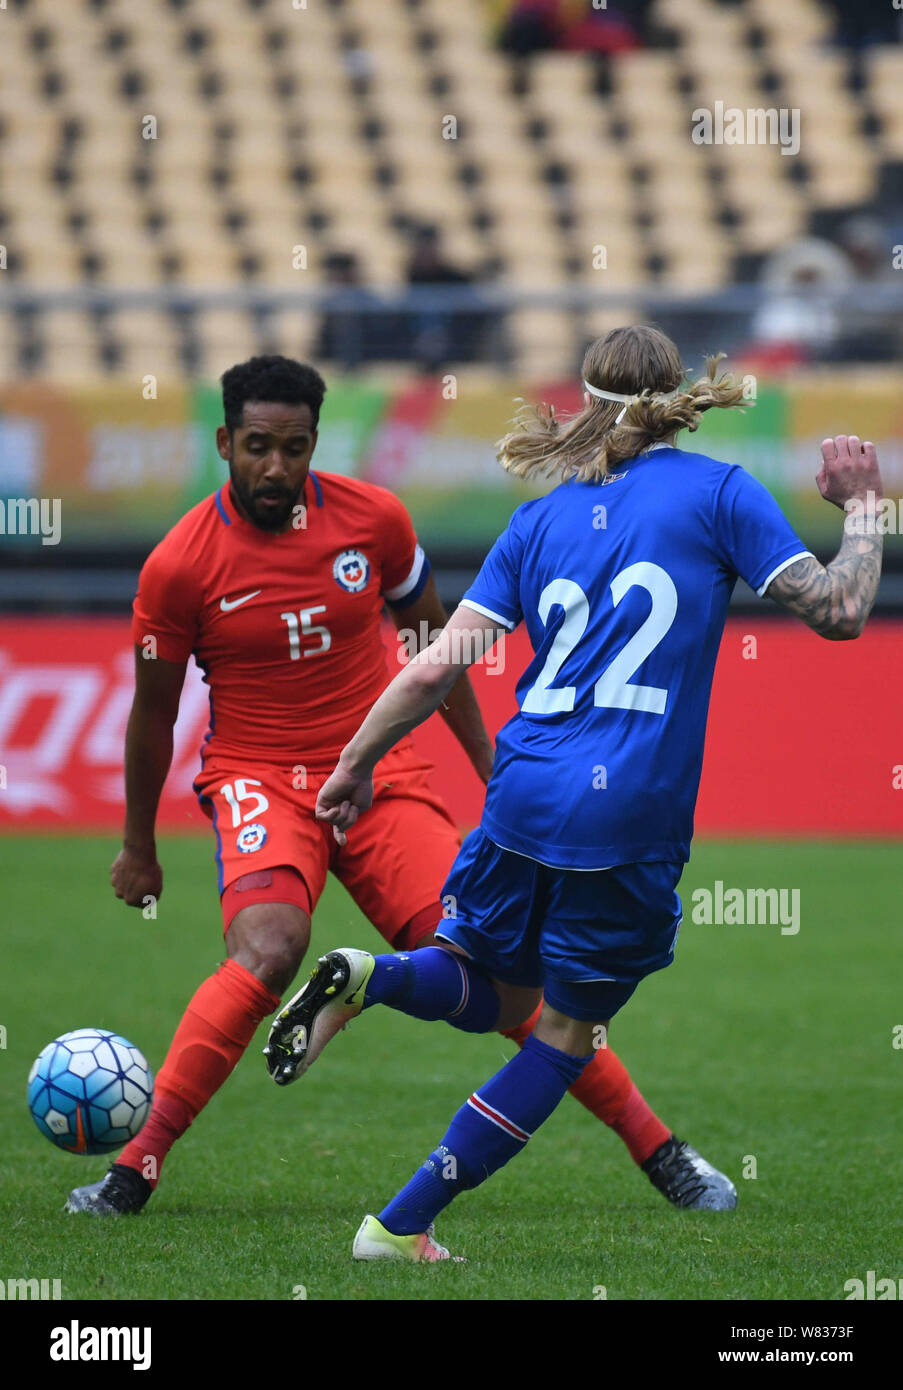 Jean Beausejour of Chile, left, challenges a player of Iceland in their final match during the 2017 Gree China Cup International Football Championship Stock Photo